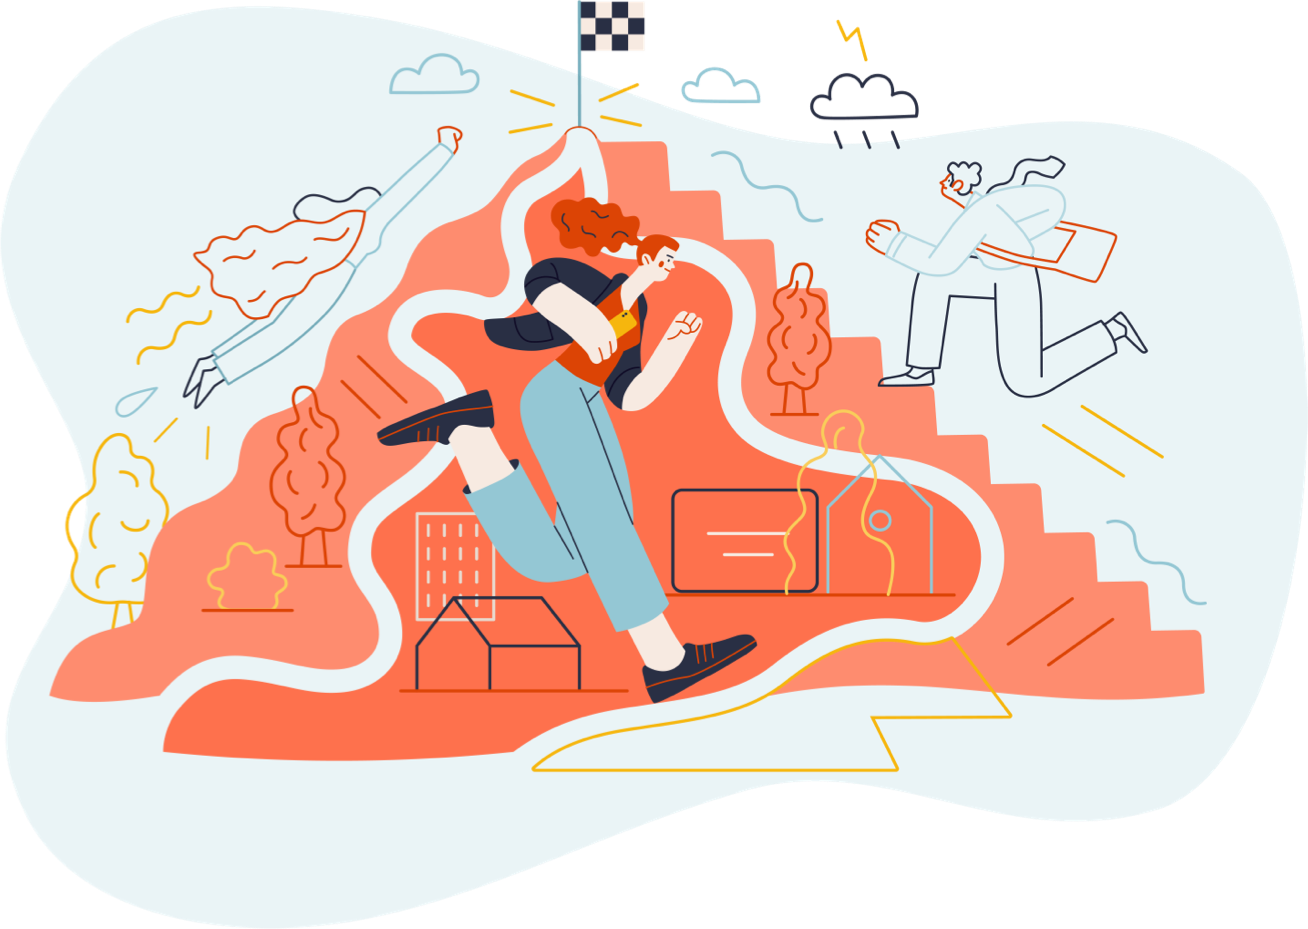 Illustration of a female entrepreneur running up a mountain trail towards a flag on top